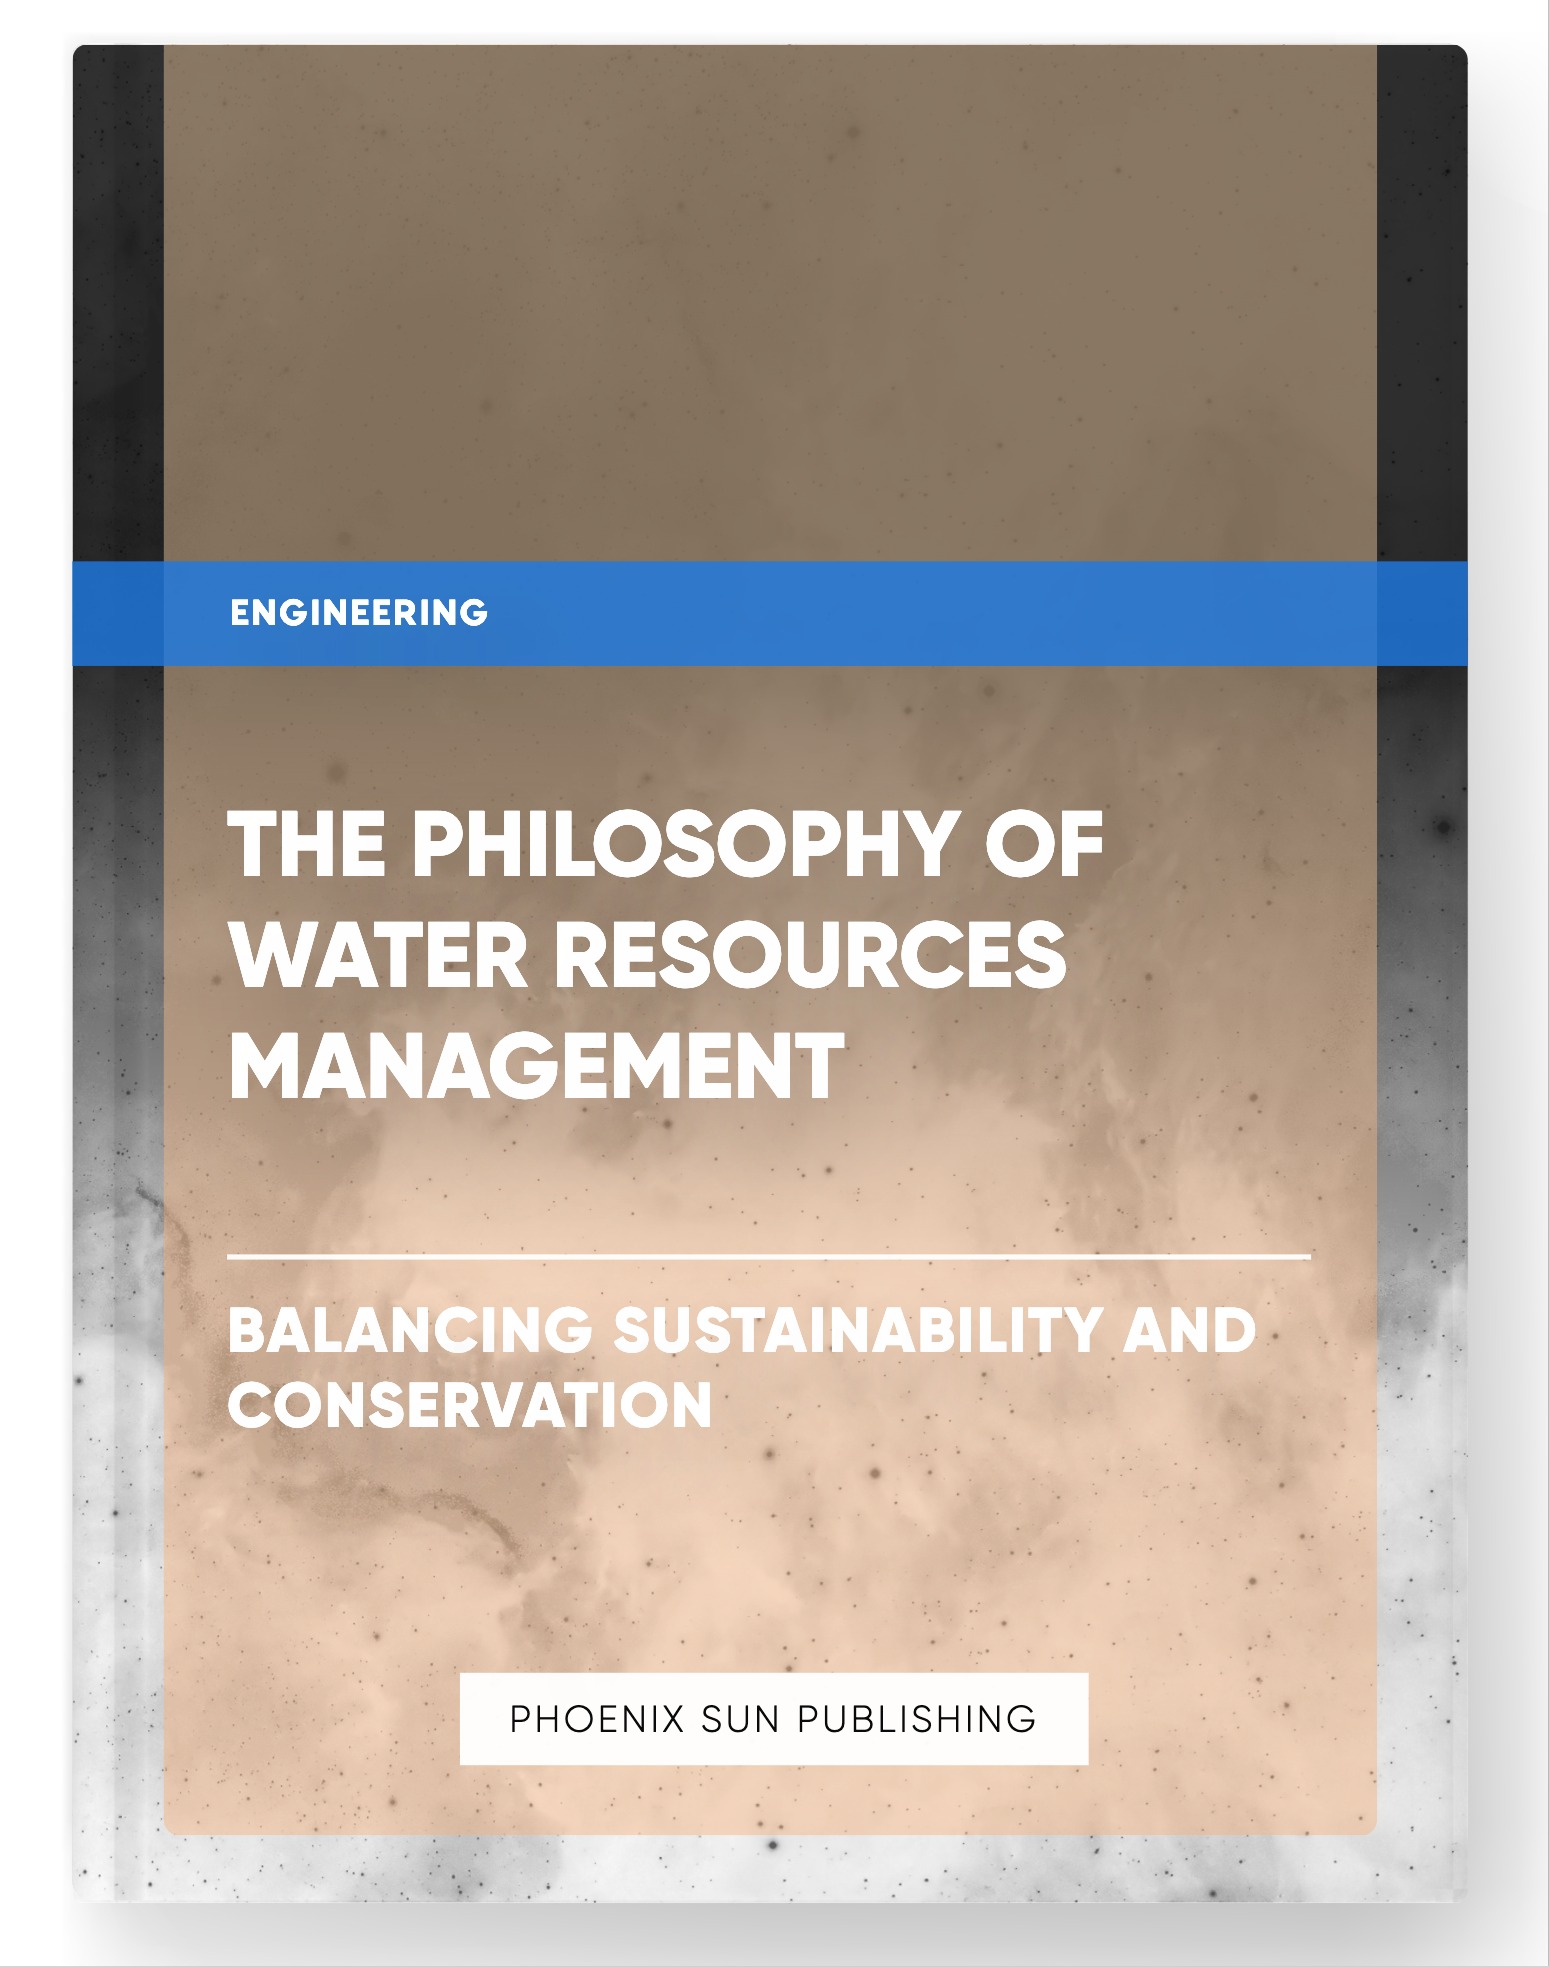 The Philosophy of Water Resources Management – Balancing Sustainability and Conservation